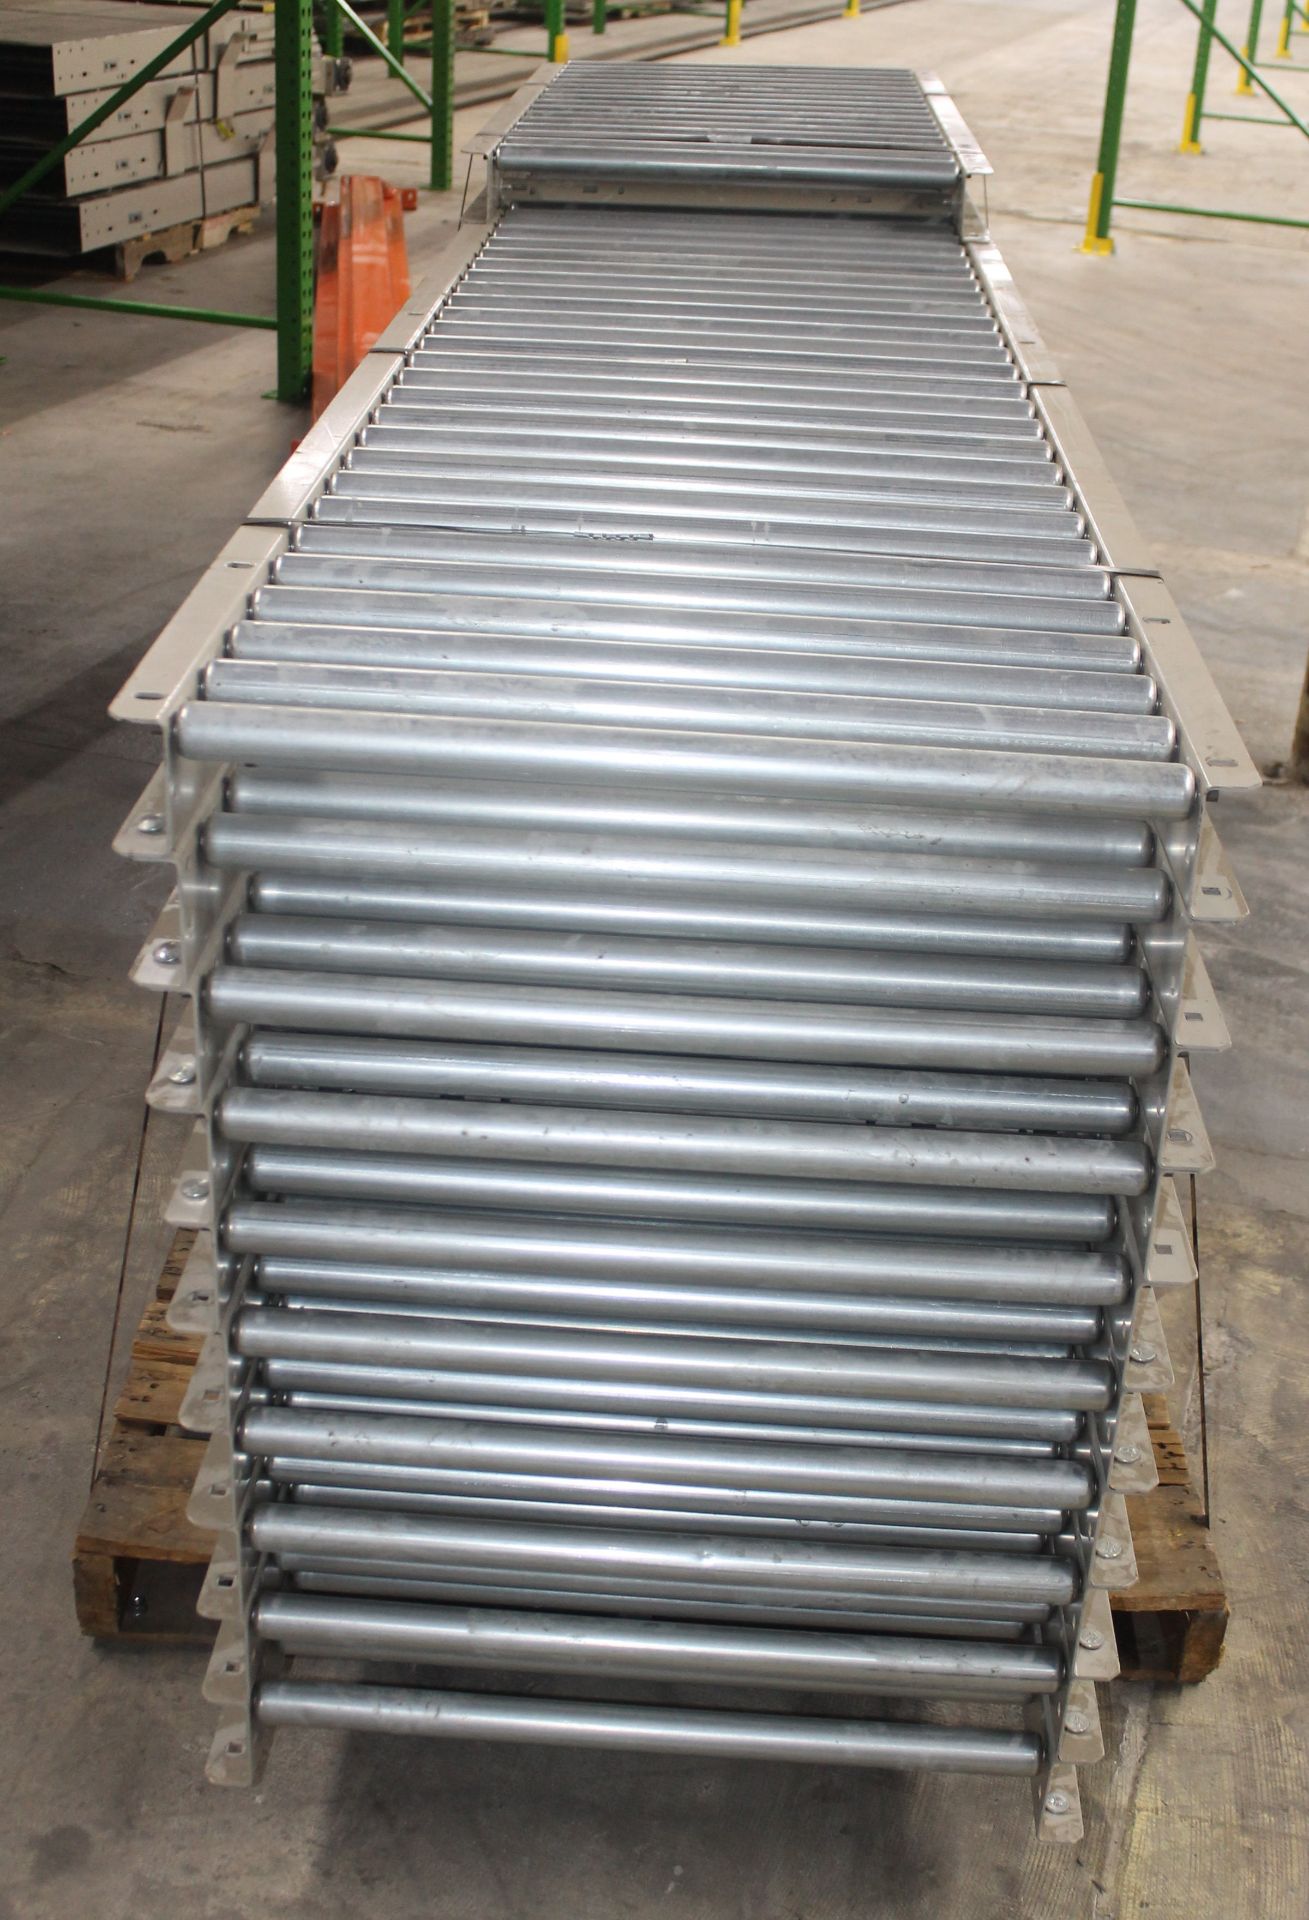 104 FT OF HK SYSTEM 24"W ROLLER GRAVITY CONVEYOR - Image 3 of 3